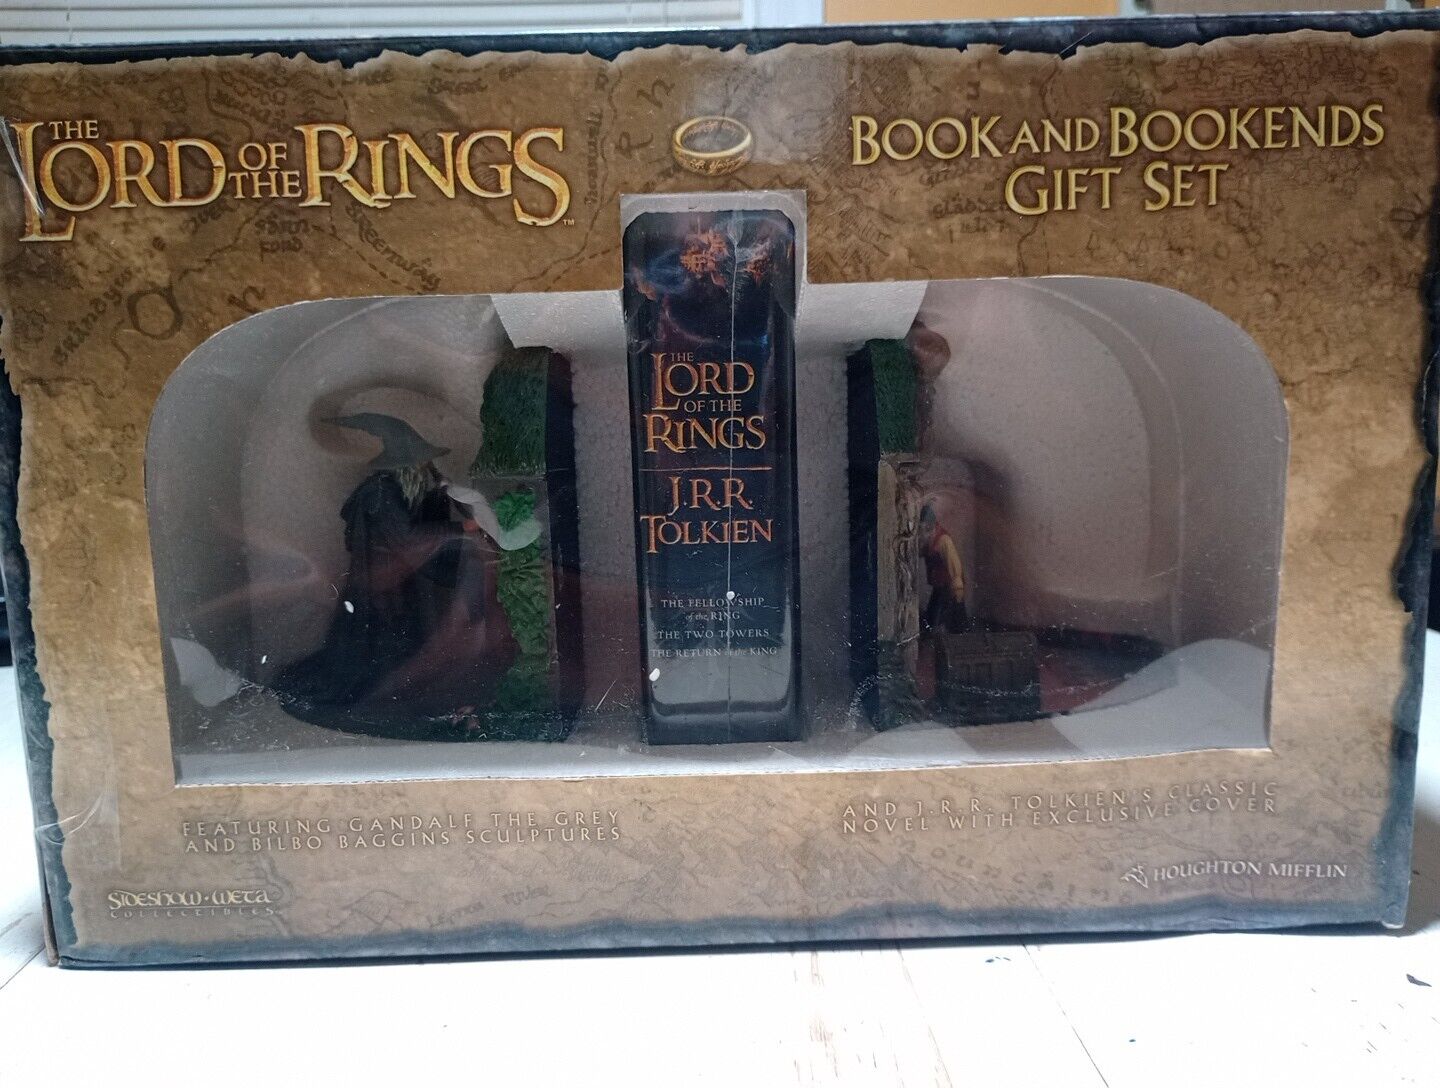 Lord Of The Rings Books And Bookends Gift Set WETA Collectibles.